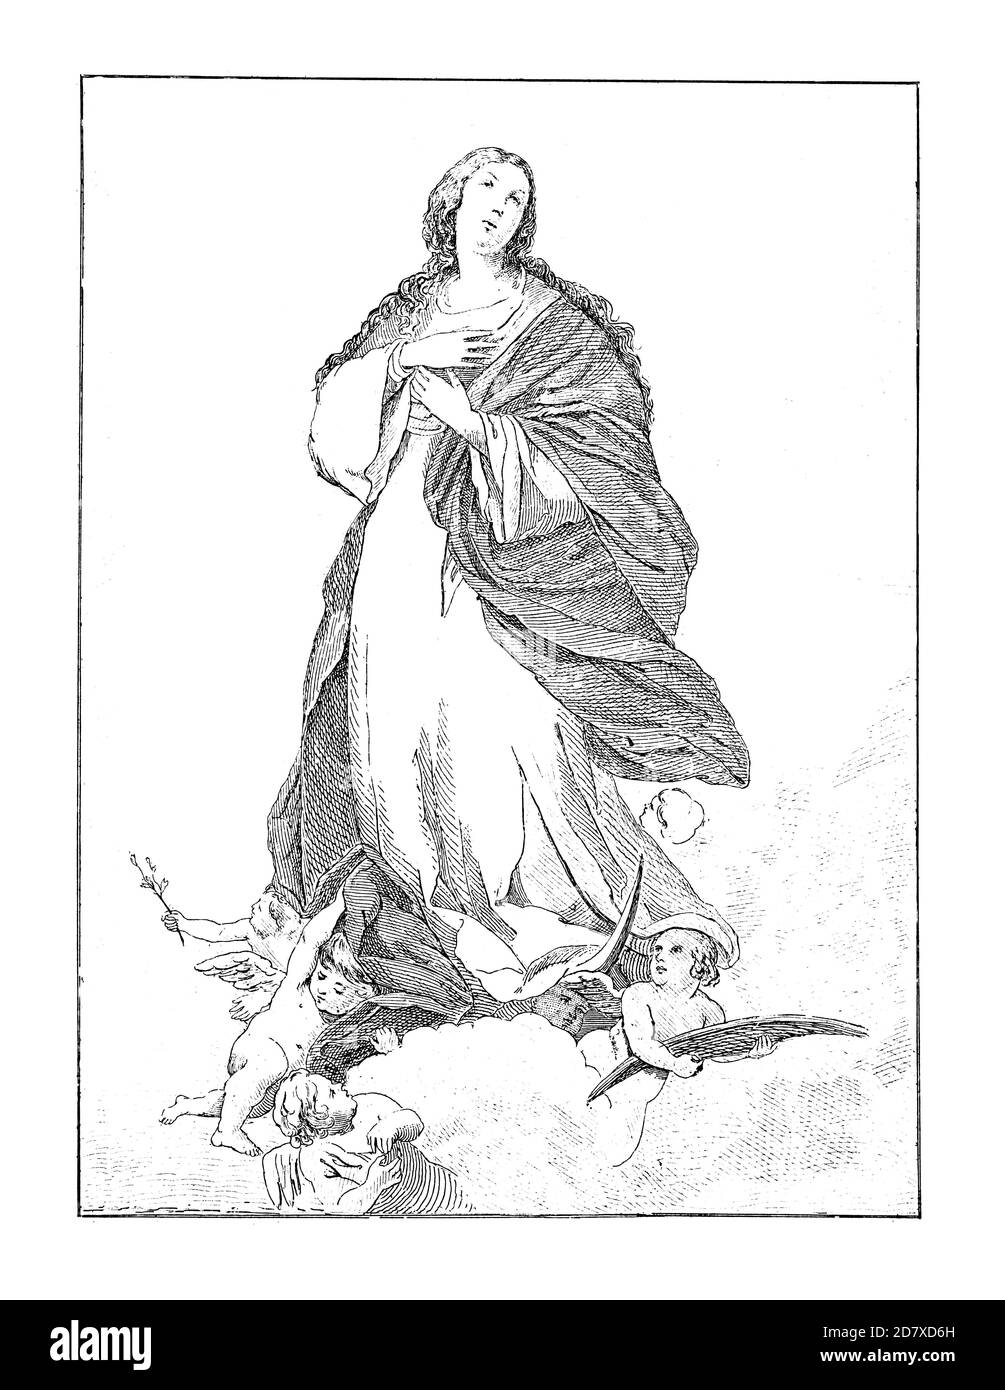 19th-century engraving depicting Immaculate Conception of Mary, painting by Bartolome Esteban Murillo. He was born on December 31, 1617 in Seville, Sp Stock Photo